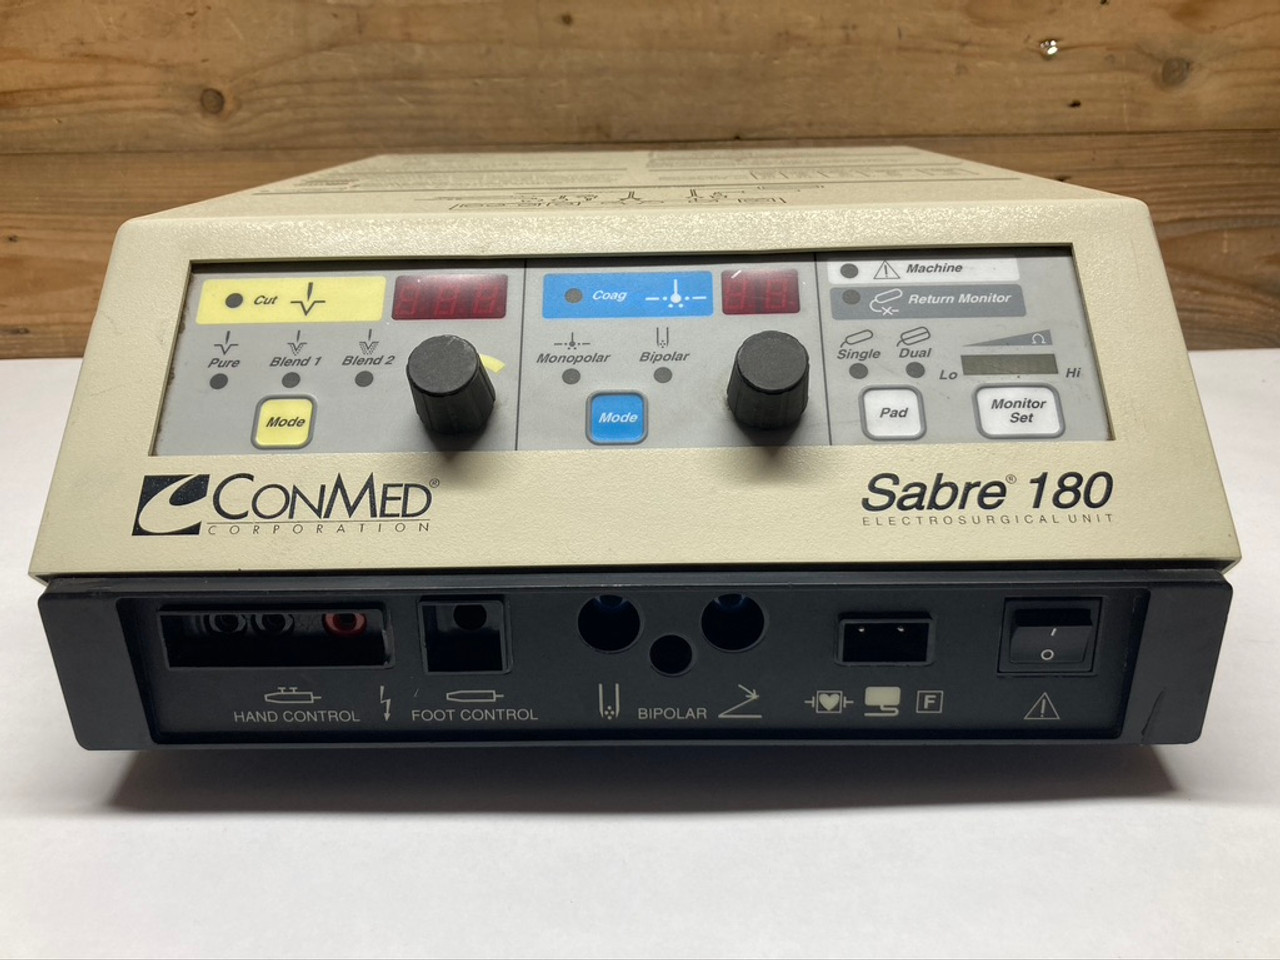 Sabre 180 Electrosurgical Unit 60-5800-001 Conmed